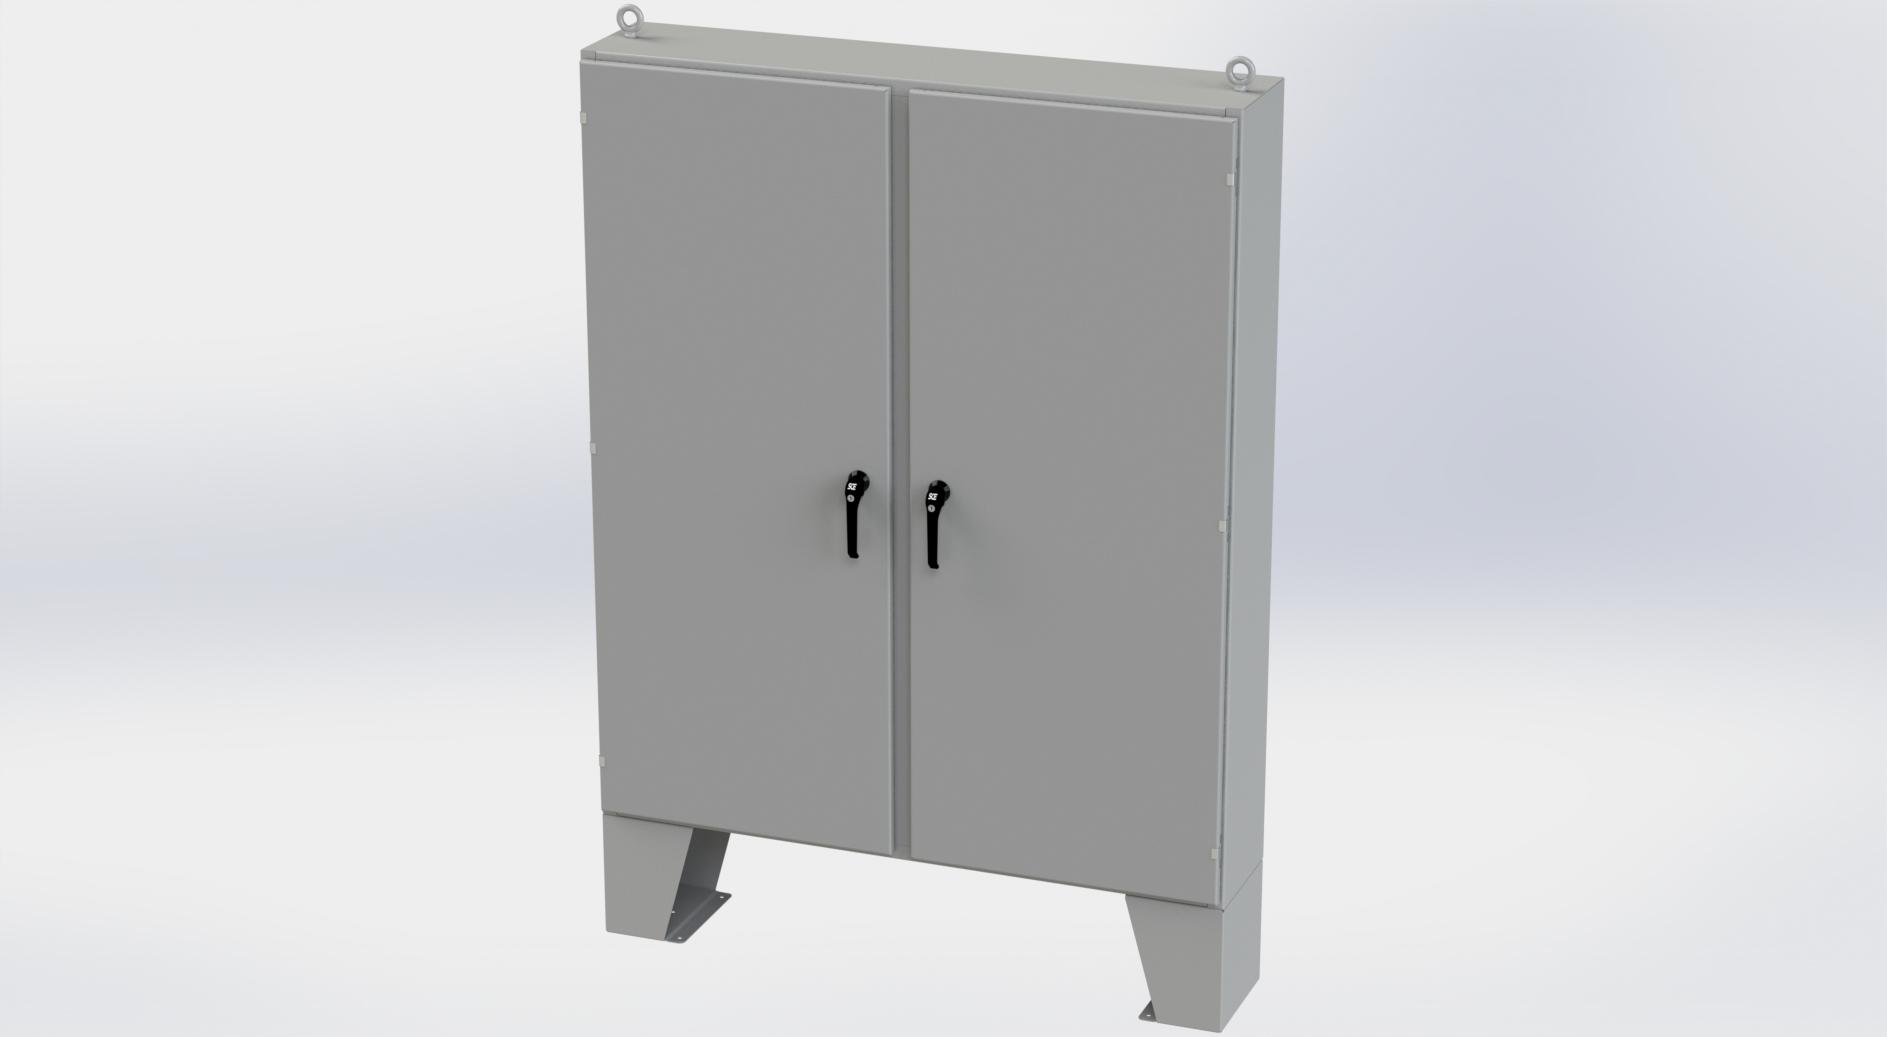 Saginaw Control SCE-72EL6012LPPL 2DR EL LPPL Enclosure, Height:72.00", Width:60.00", Depth:12.00", ANSI-61 gray powder coating inside and out. Optional sub-panels are powder coated white.